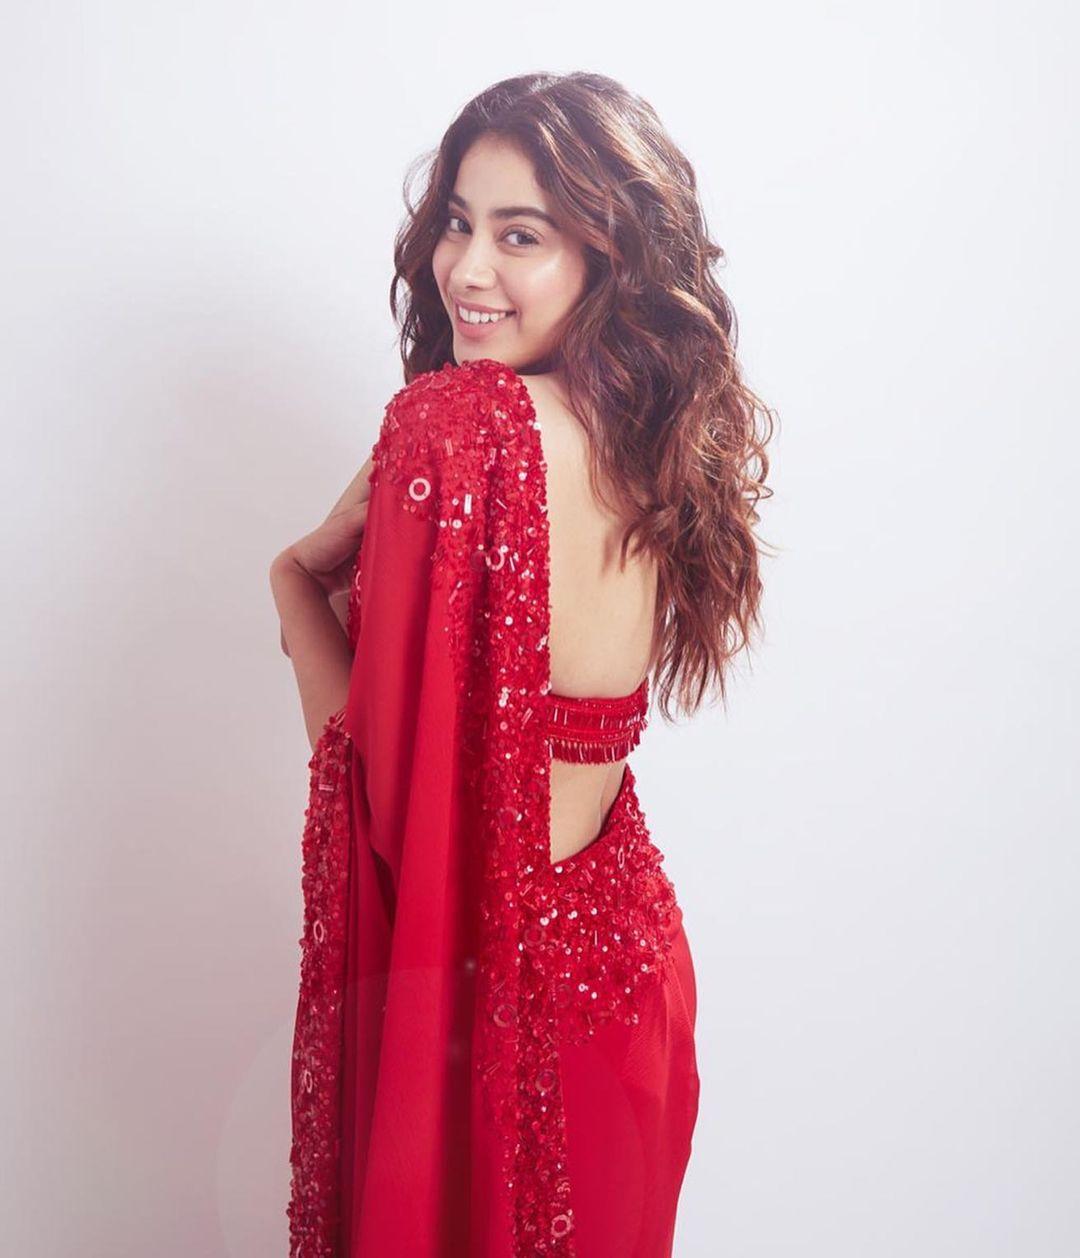 Janhvi Kapoor's choice of a sultry red Manish Malhotra saree and blouse set couldn't be more perfect for Diwali